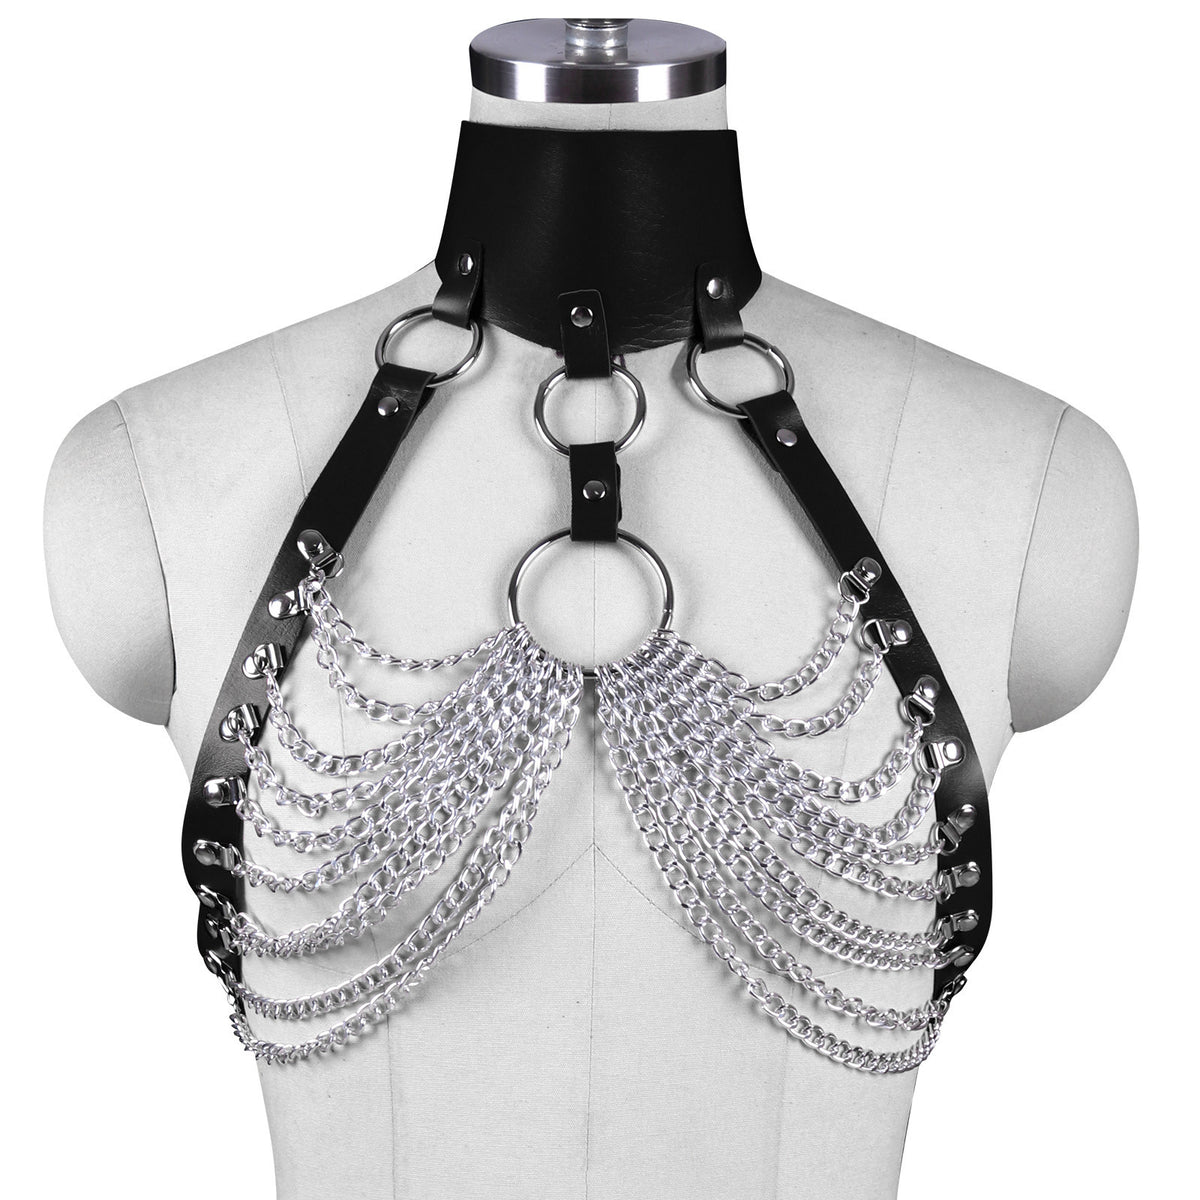 Enchanted Chainmail Leather Harness-Suspender Belts-StylinArts